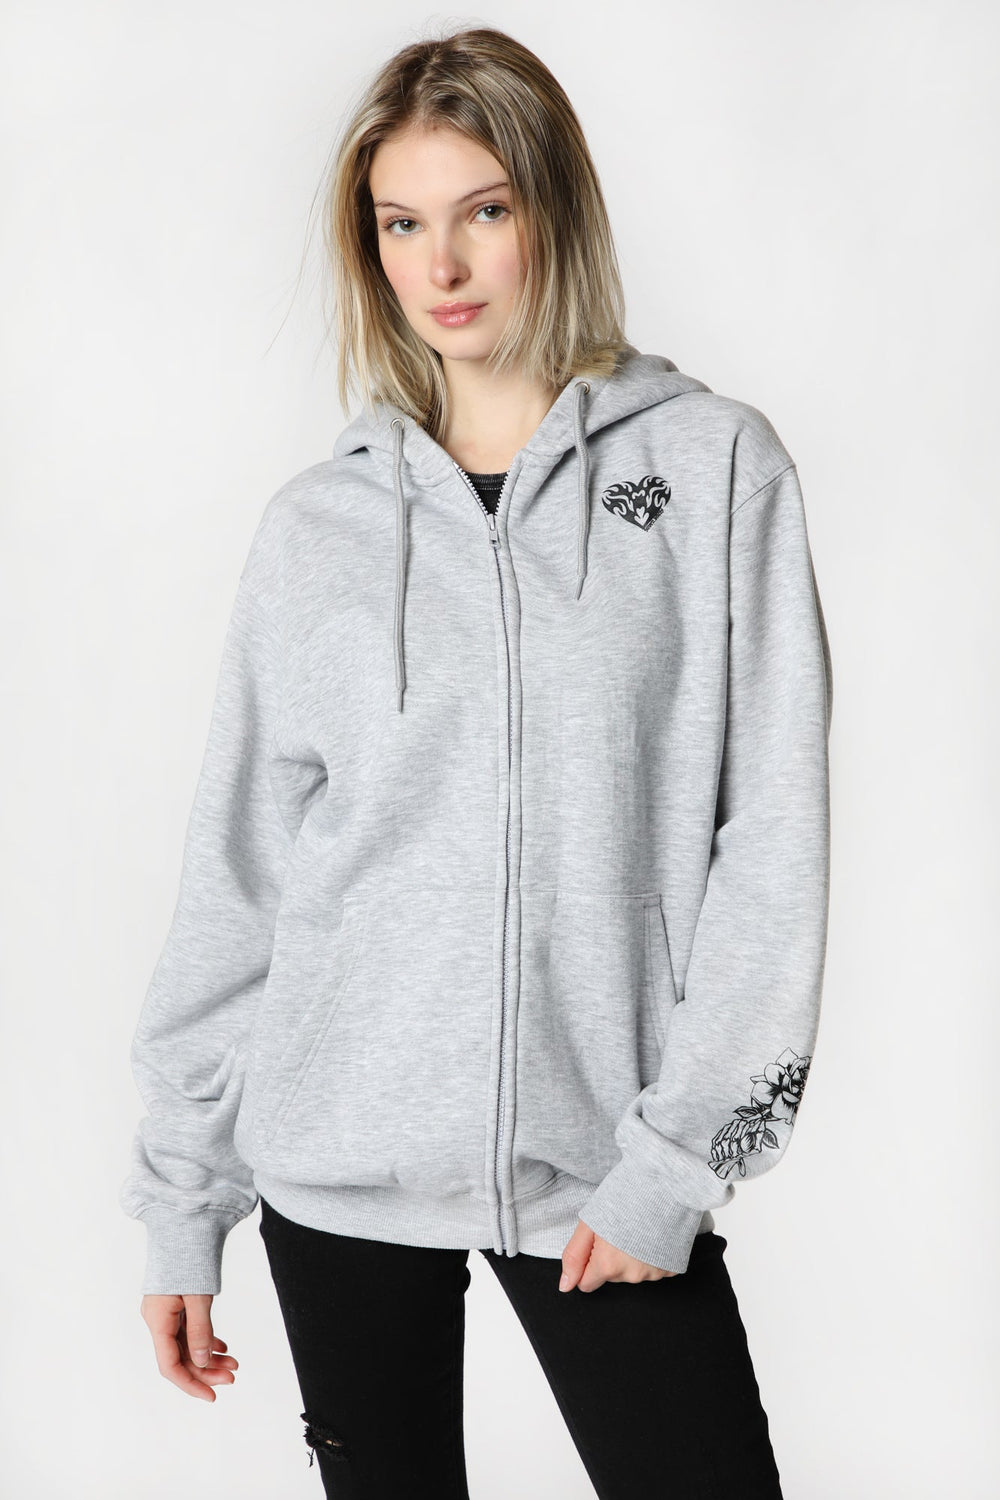 Womens Sovrn Voices Graphic Zip-Up Hoodie Womens Sovrn Voices Graphic Zip-Up Hoodie